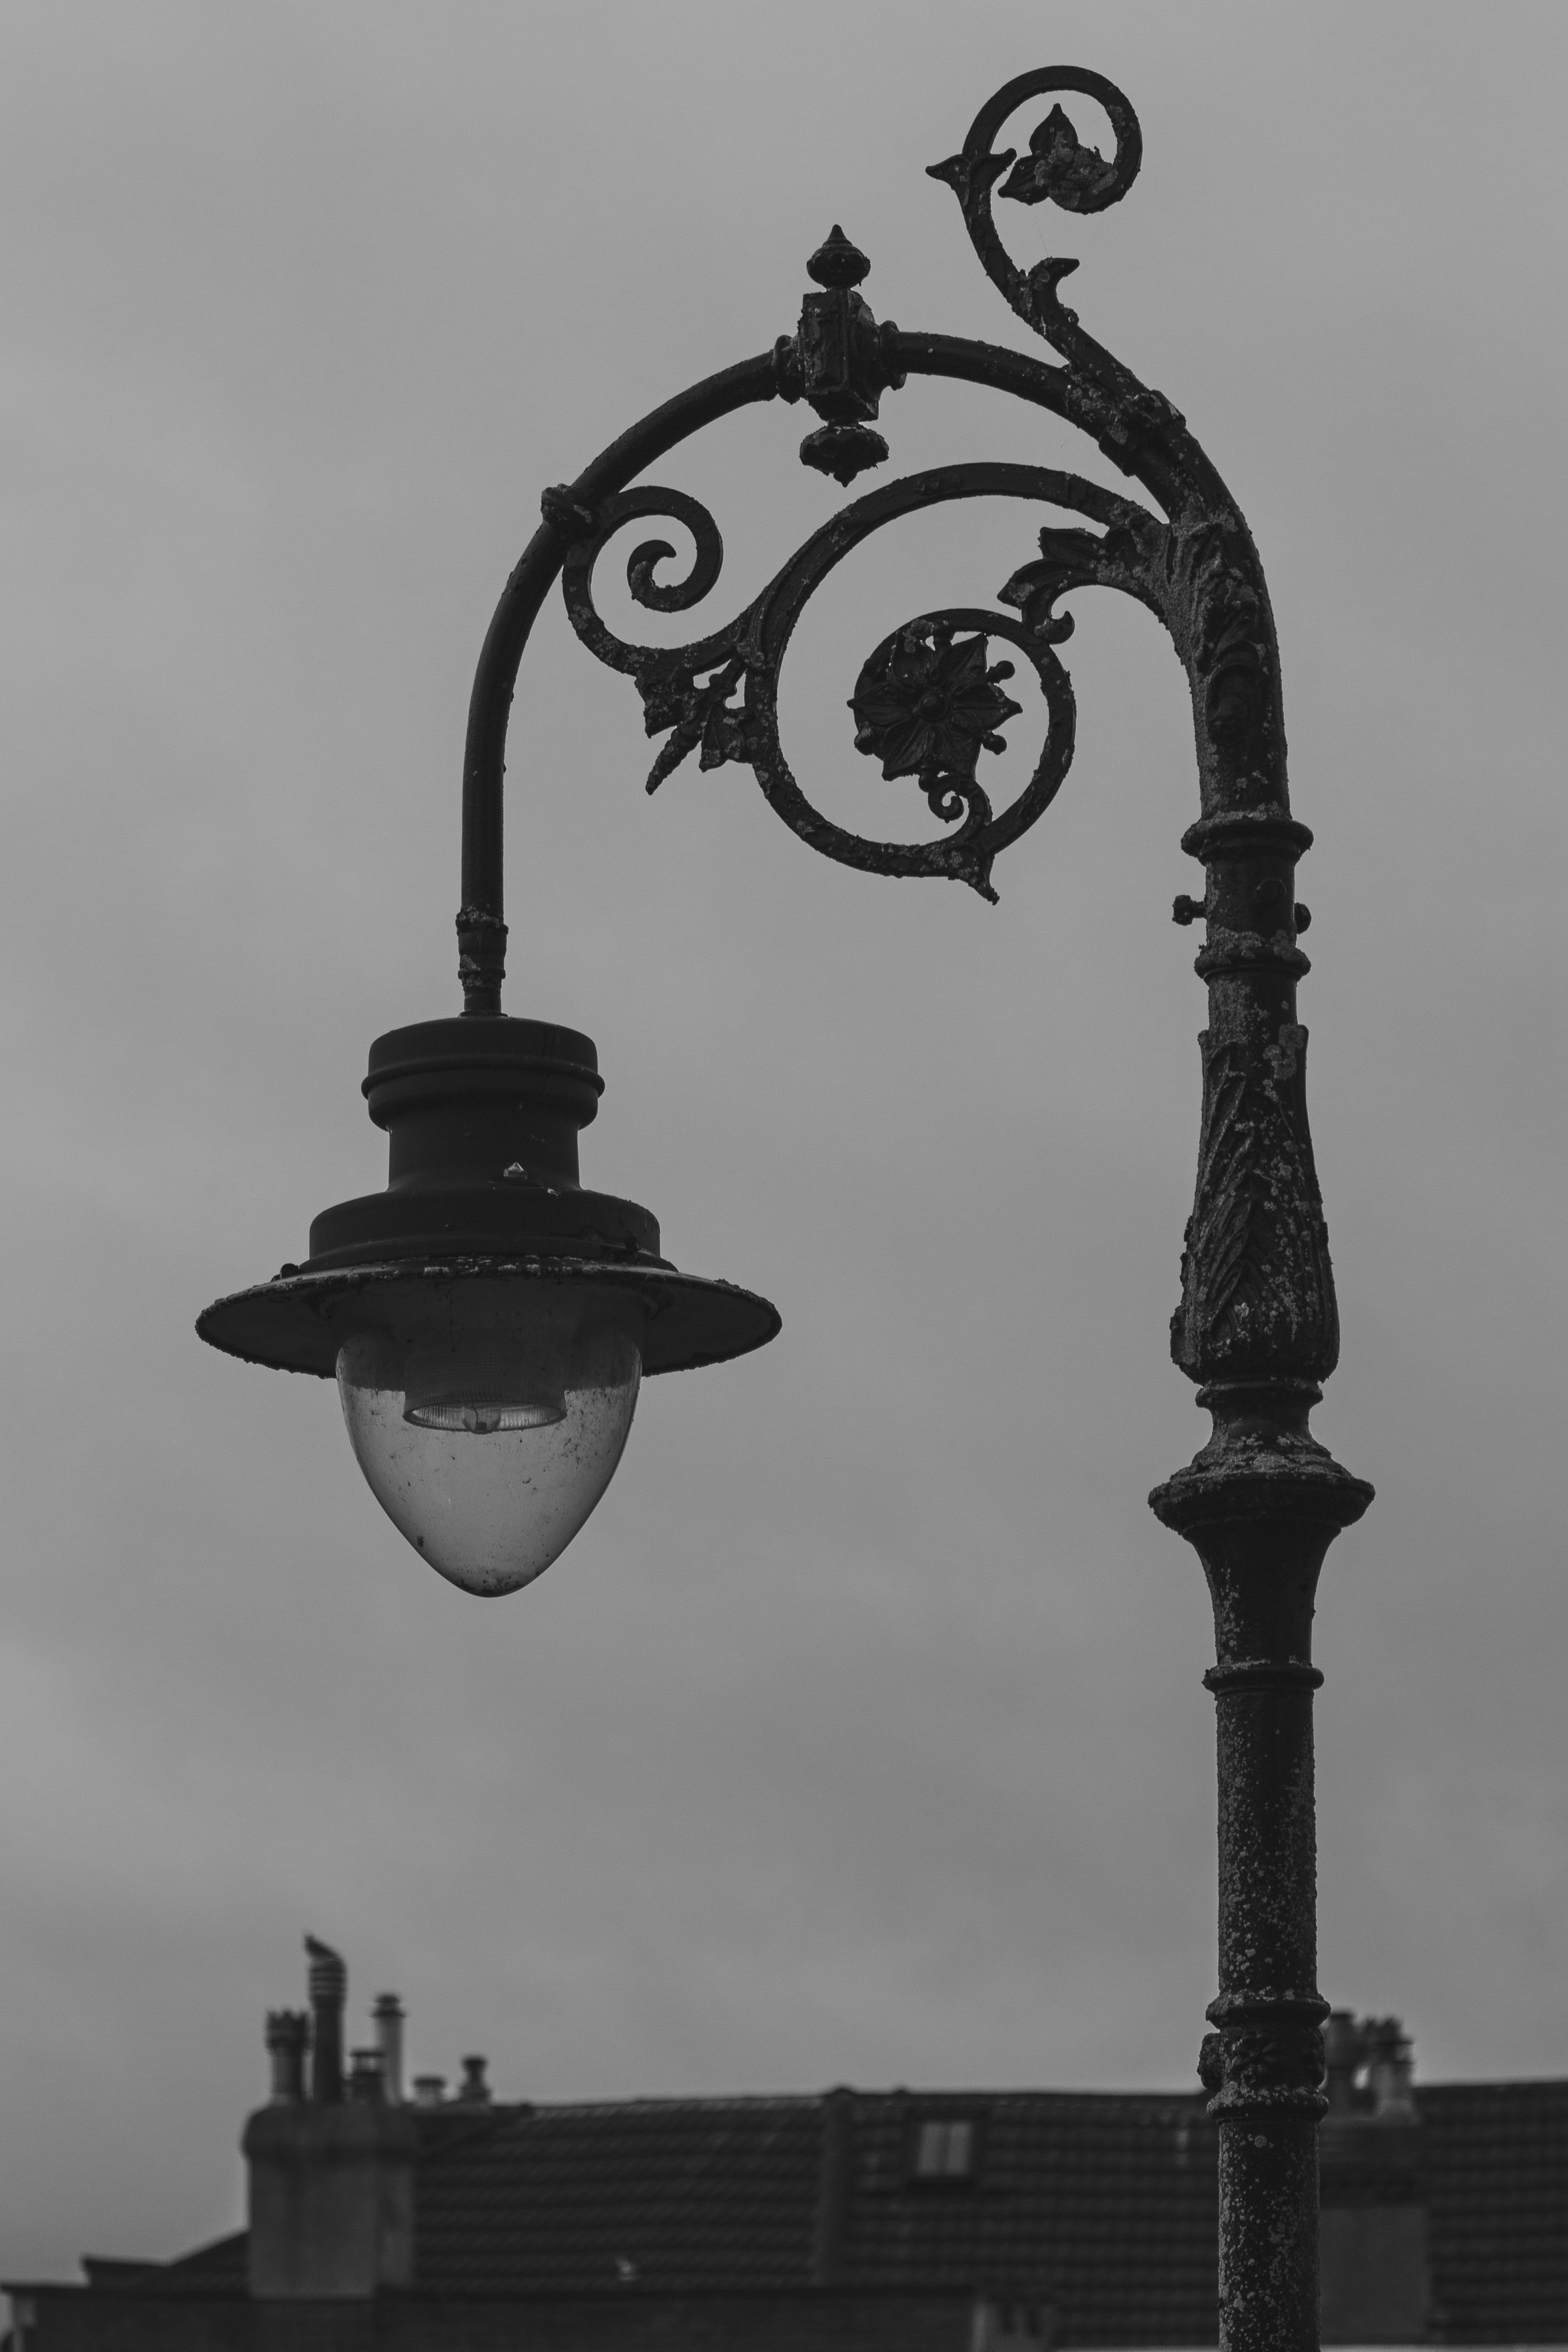 One
I love the lamps on Royal York Crescent.
